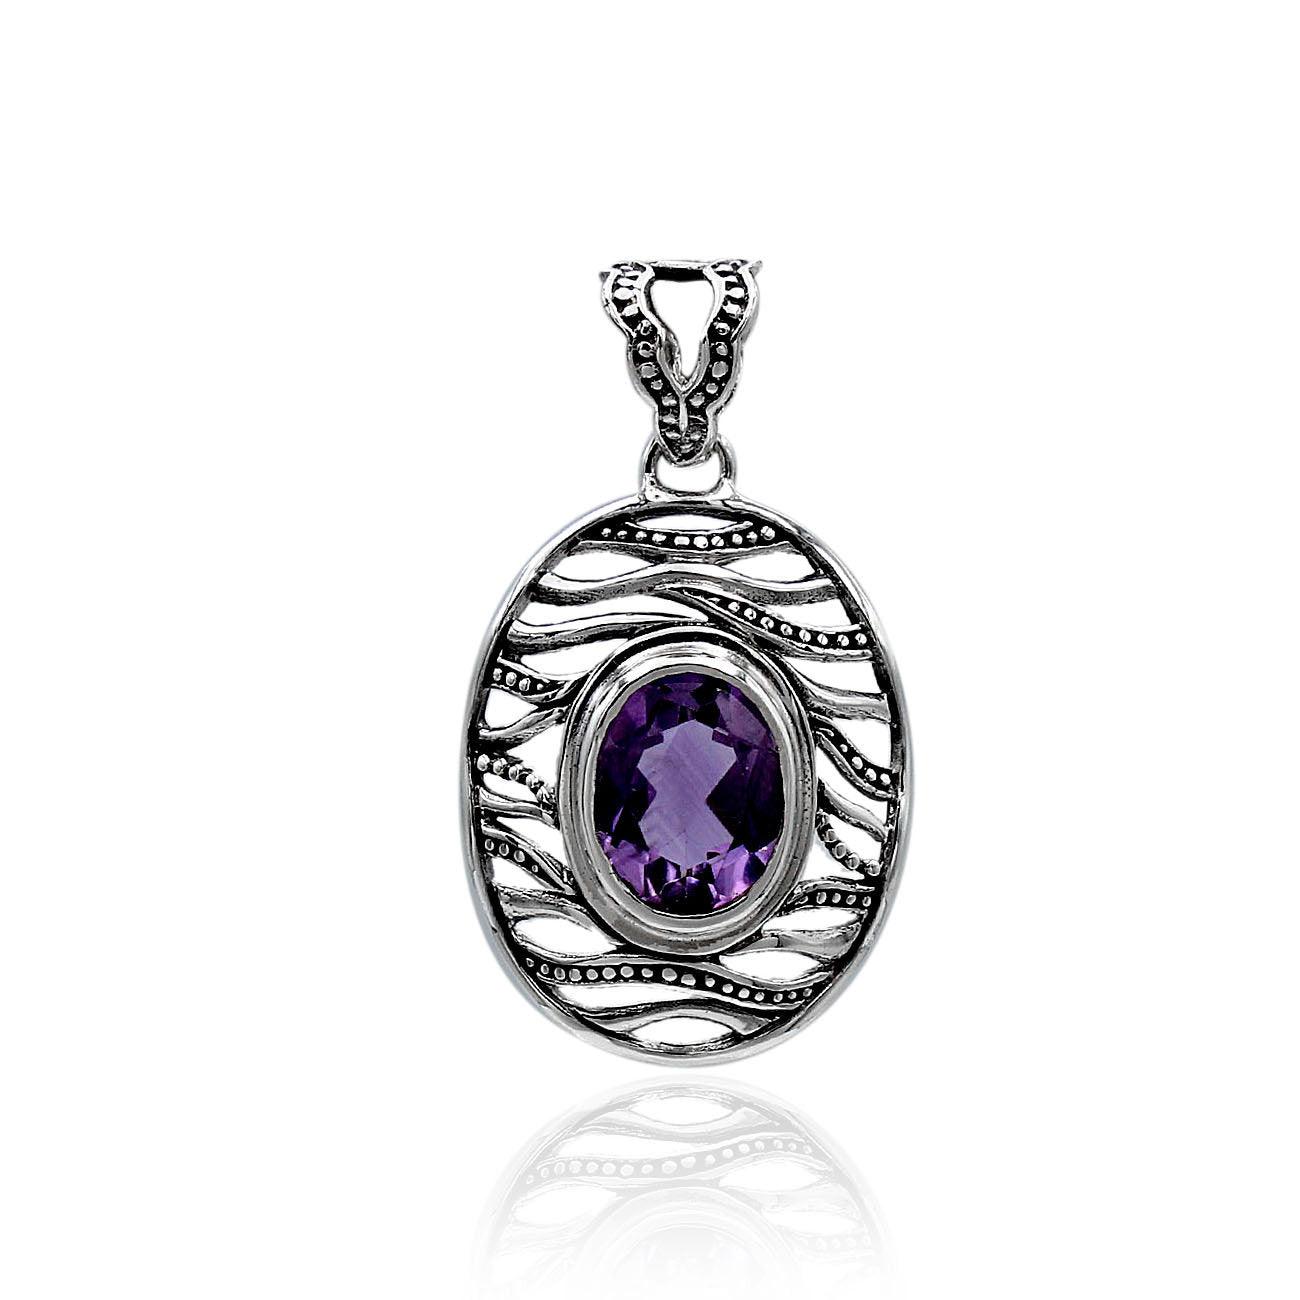 Designer AMETHYST Gemstone Pendant Necklace in 925 Sterling Silver with Chain - 2.8Cm - Inspiring Jewellery